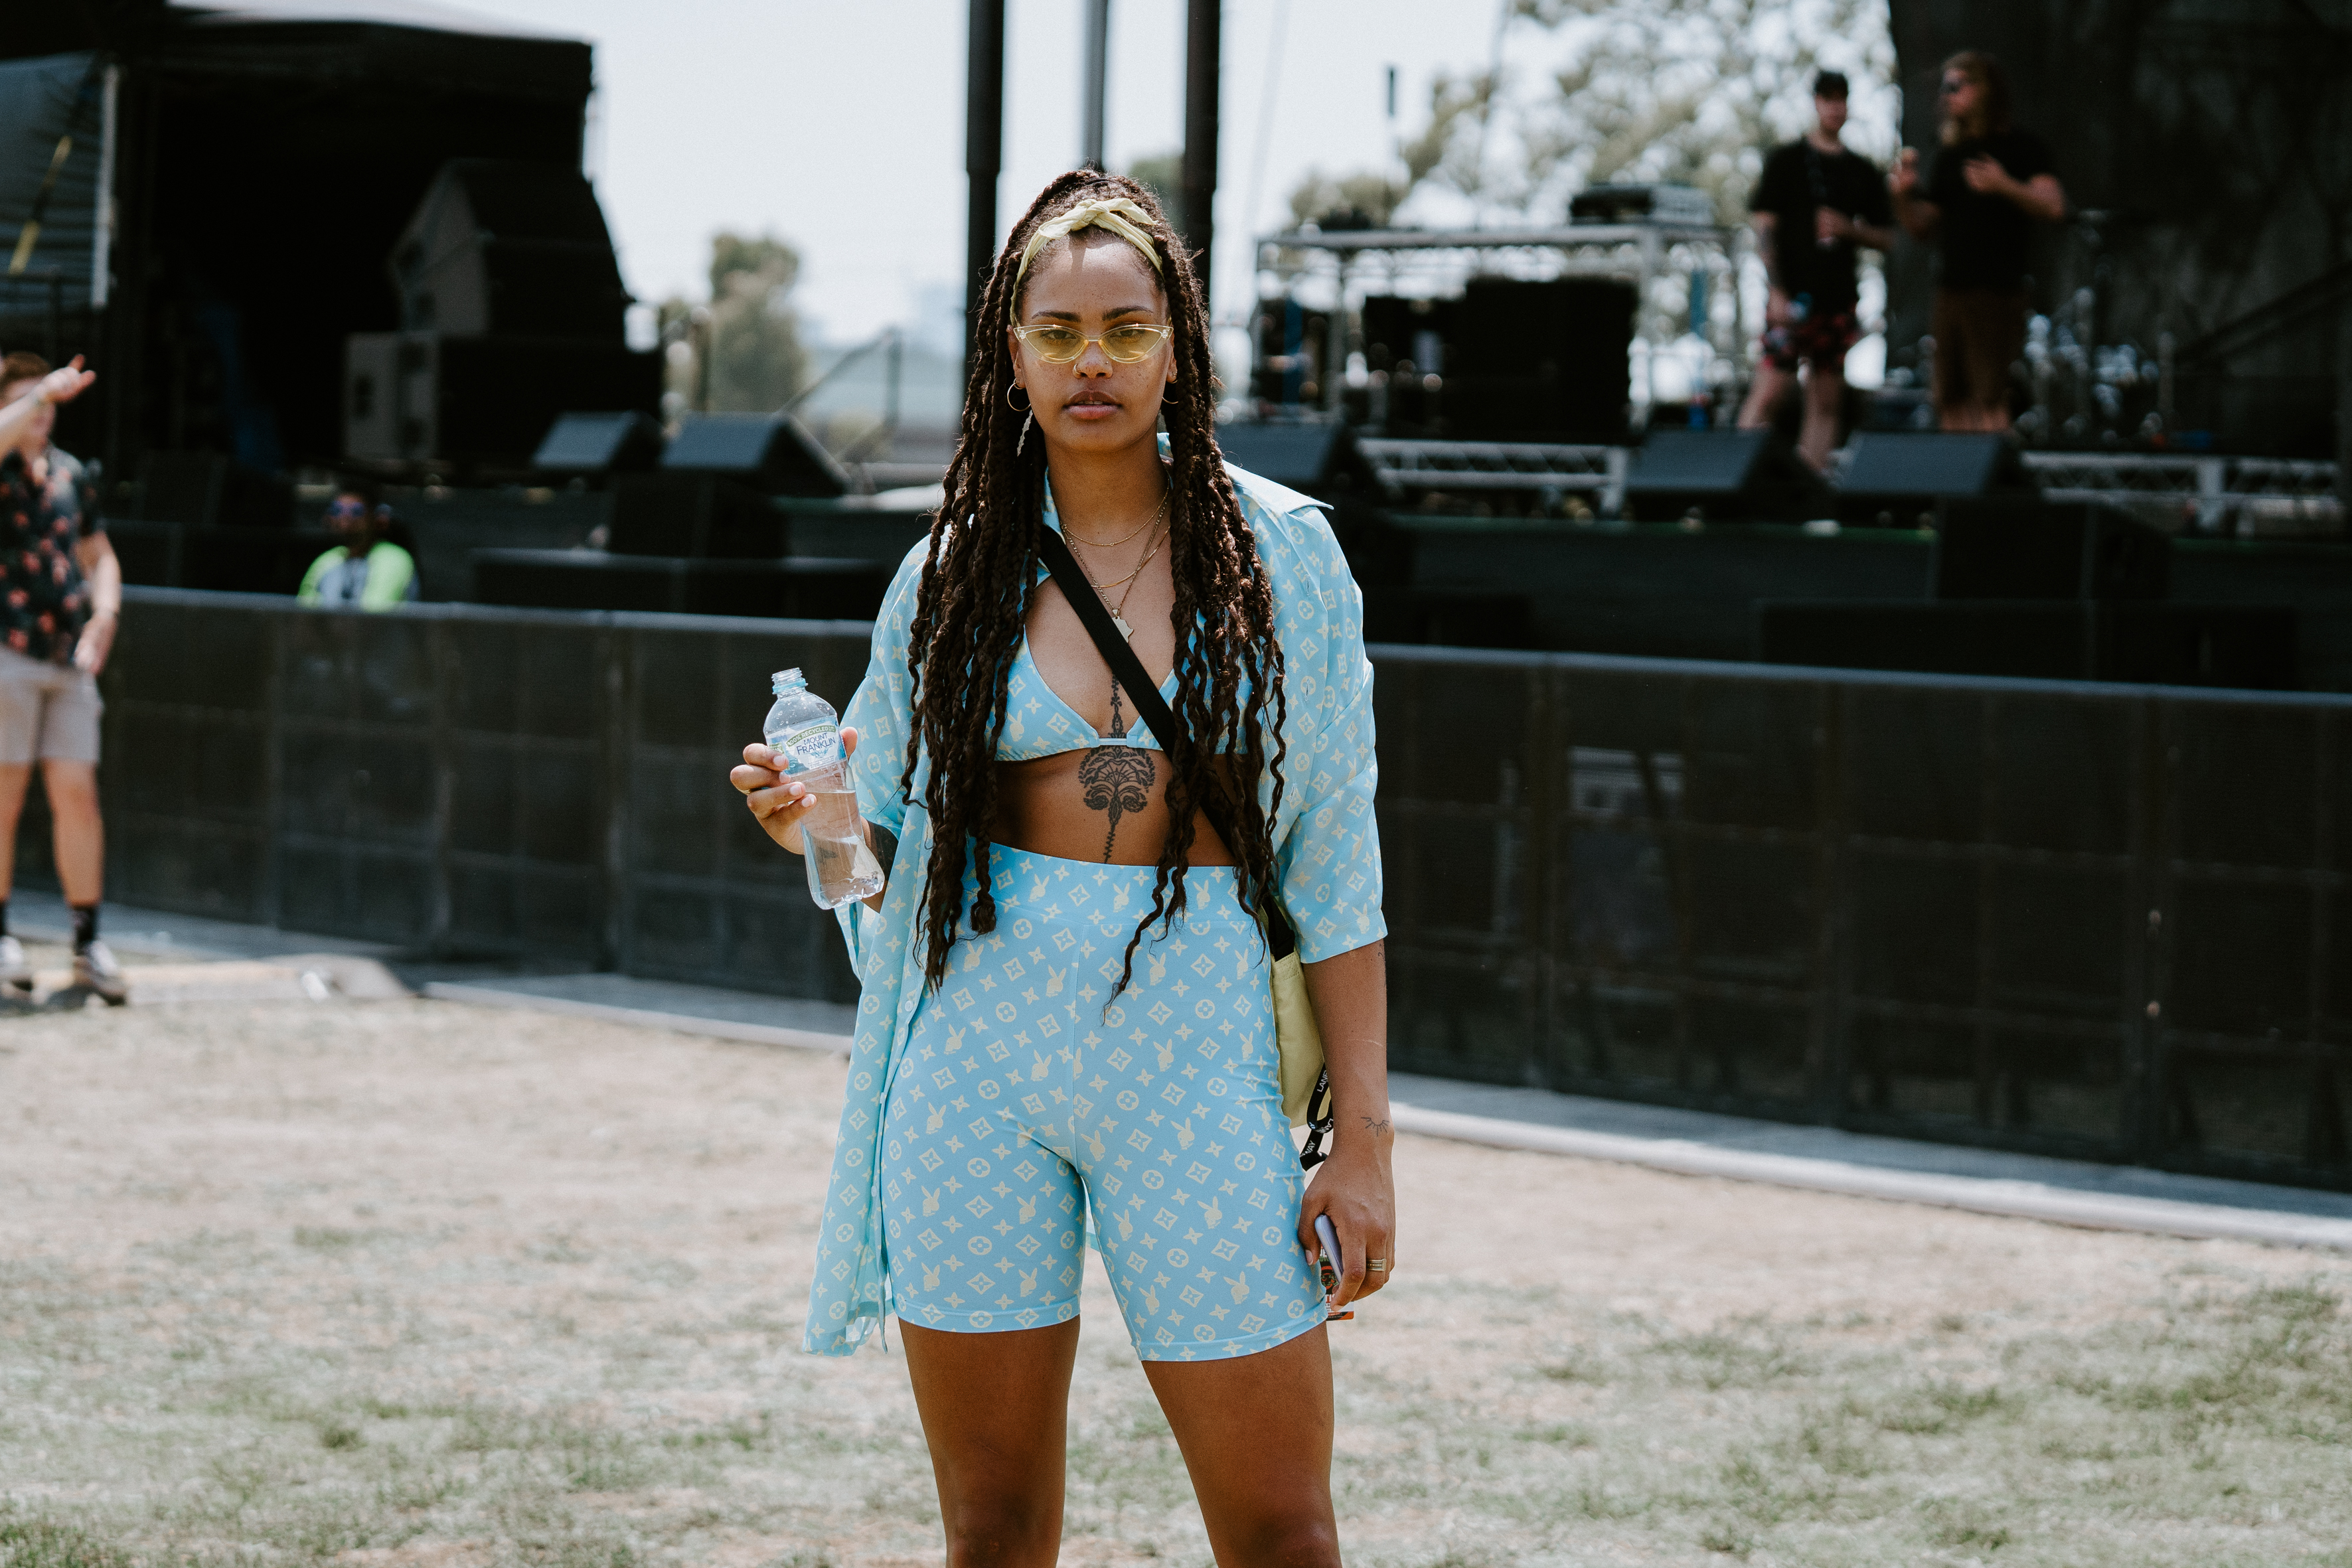 GALLERY: The Fashion From Laneway 2020 - Glam Adelaide